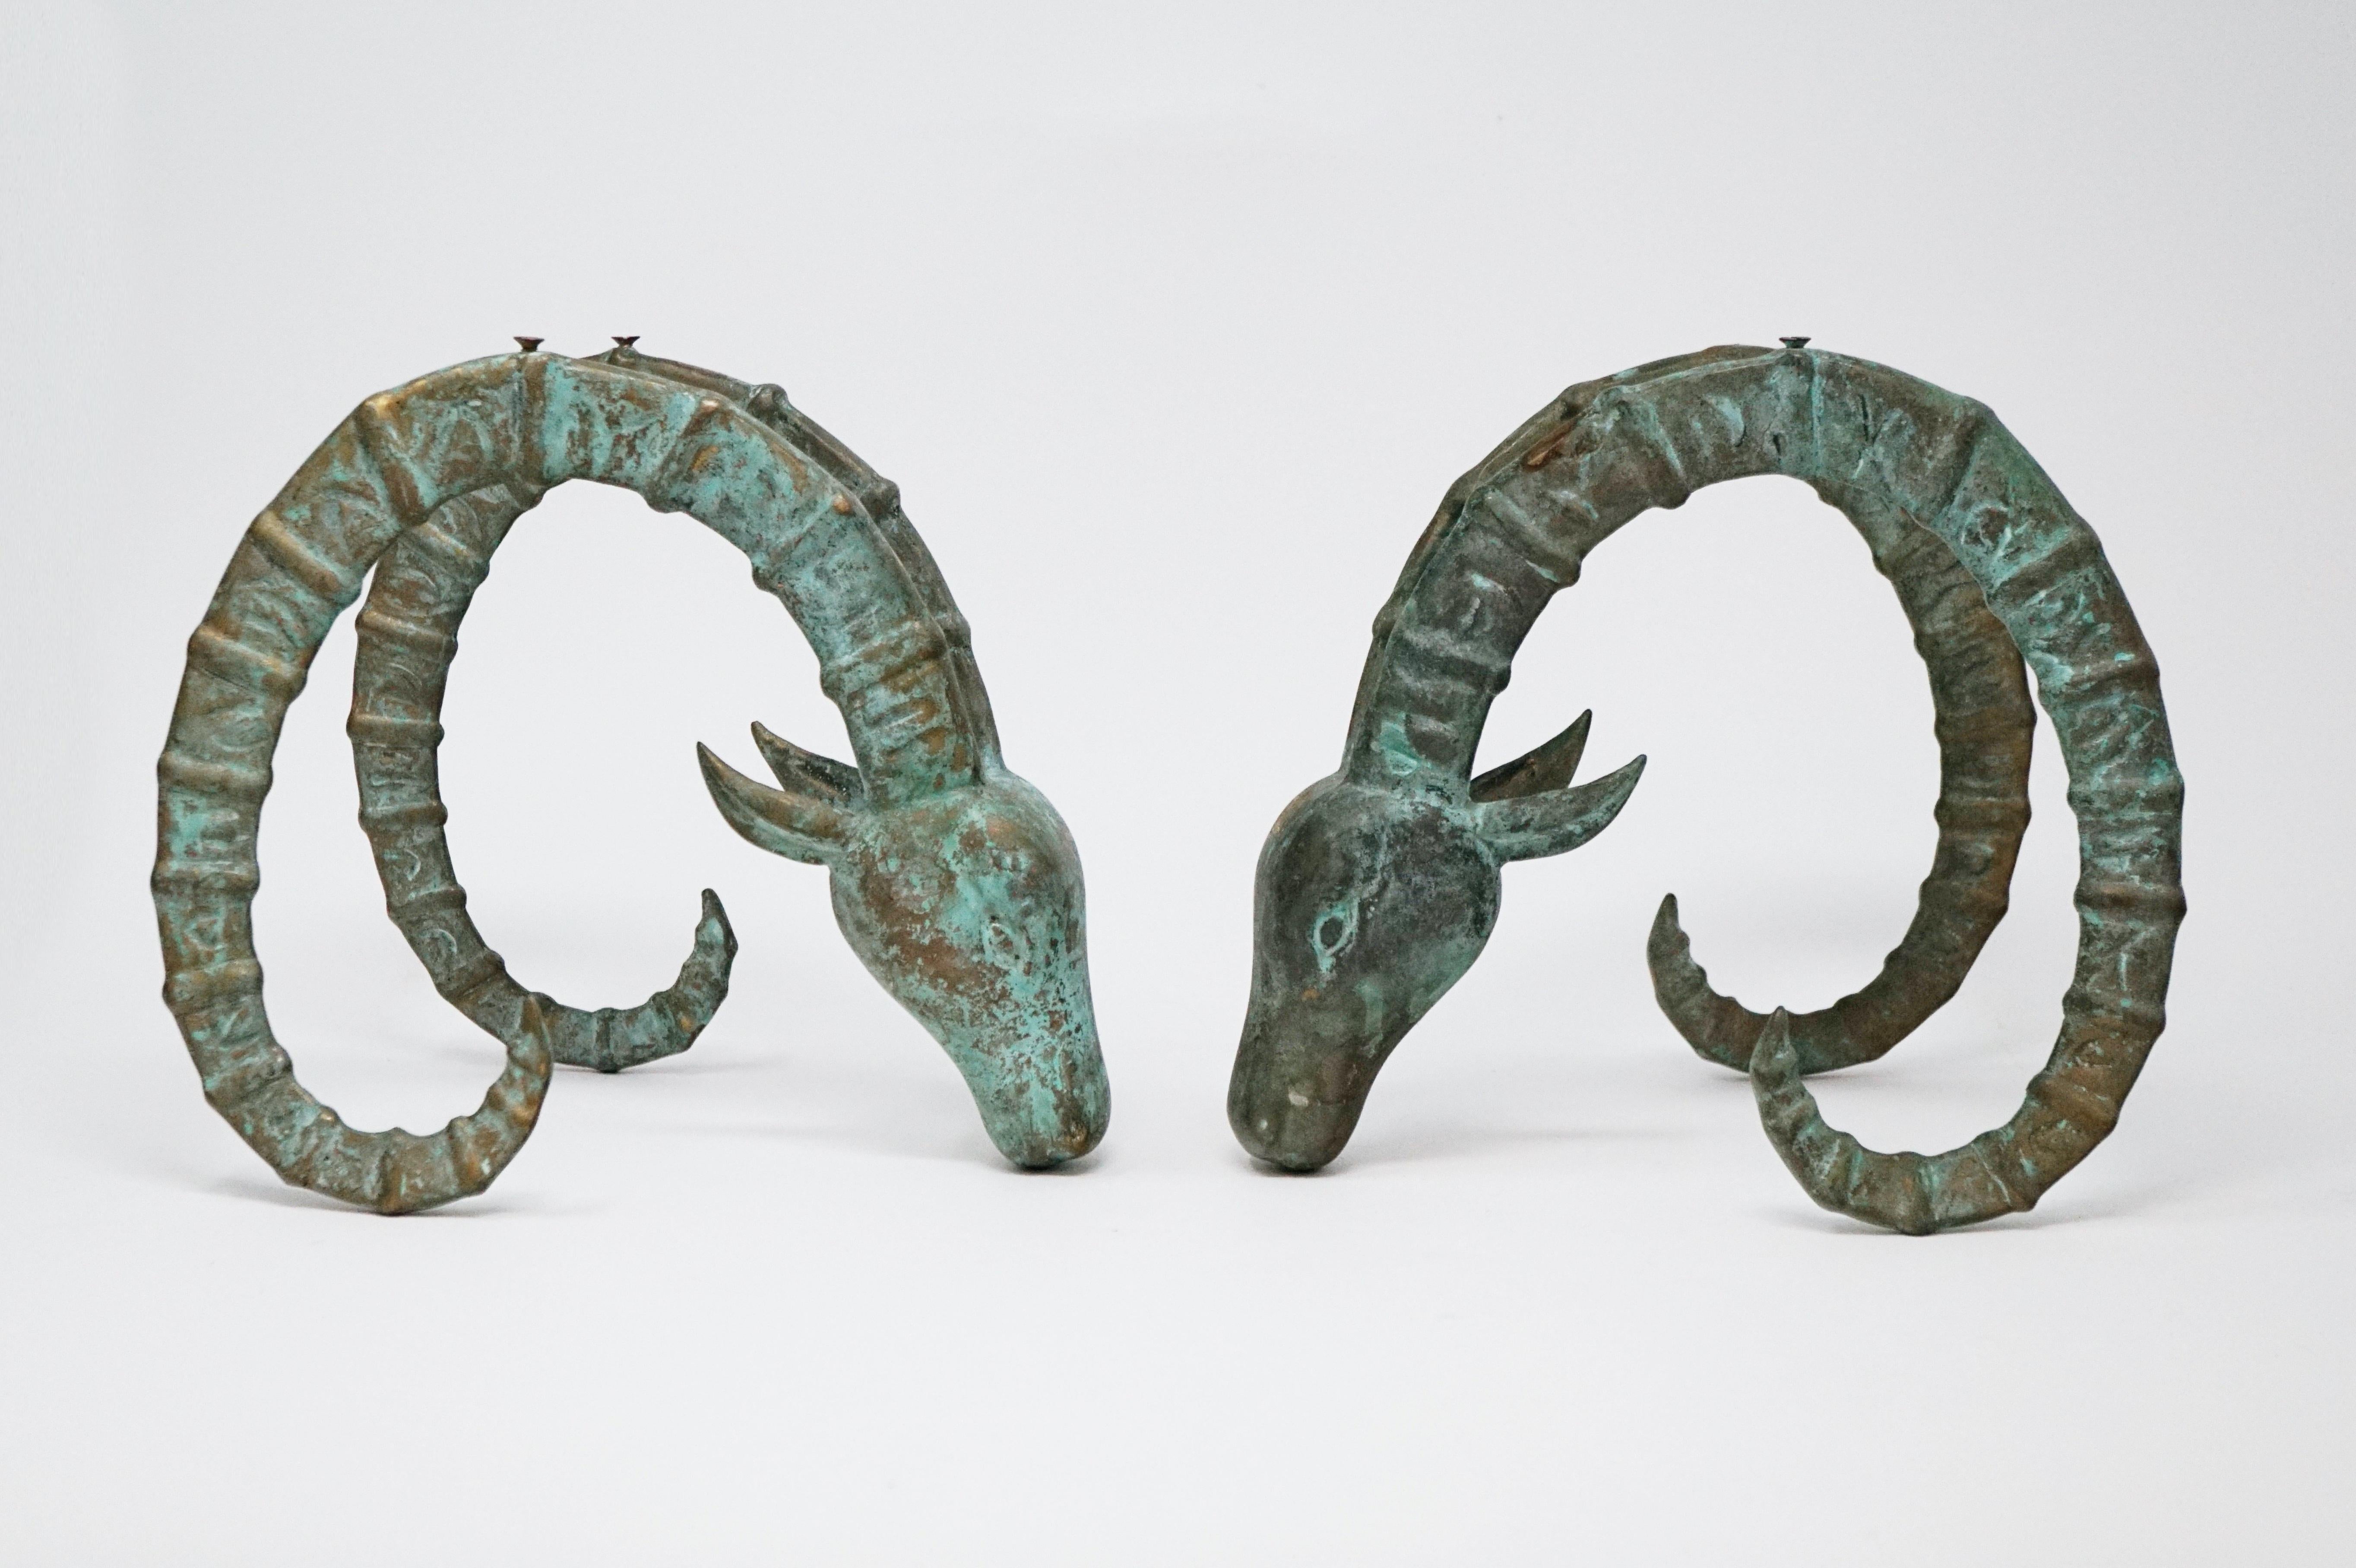 Set of two vintage bronze Ibex Ram's head sculptural figures in the manner of Alain Chervet, circa 1970s.

A beautiful natural patina covers these unique decorative objects, which can be used as bookends, accent pieces, or even crafted into a